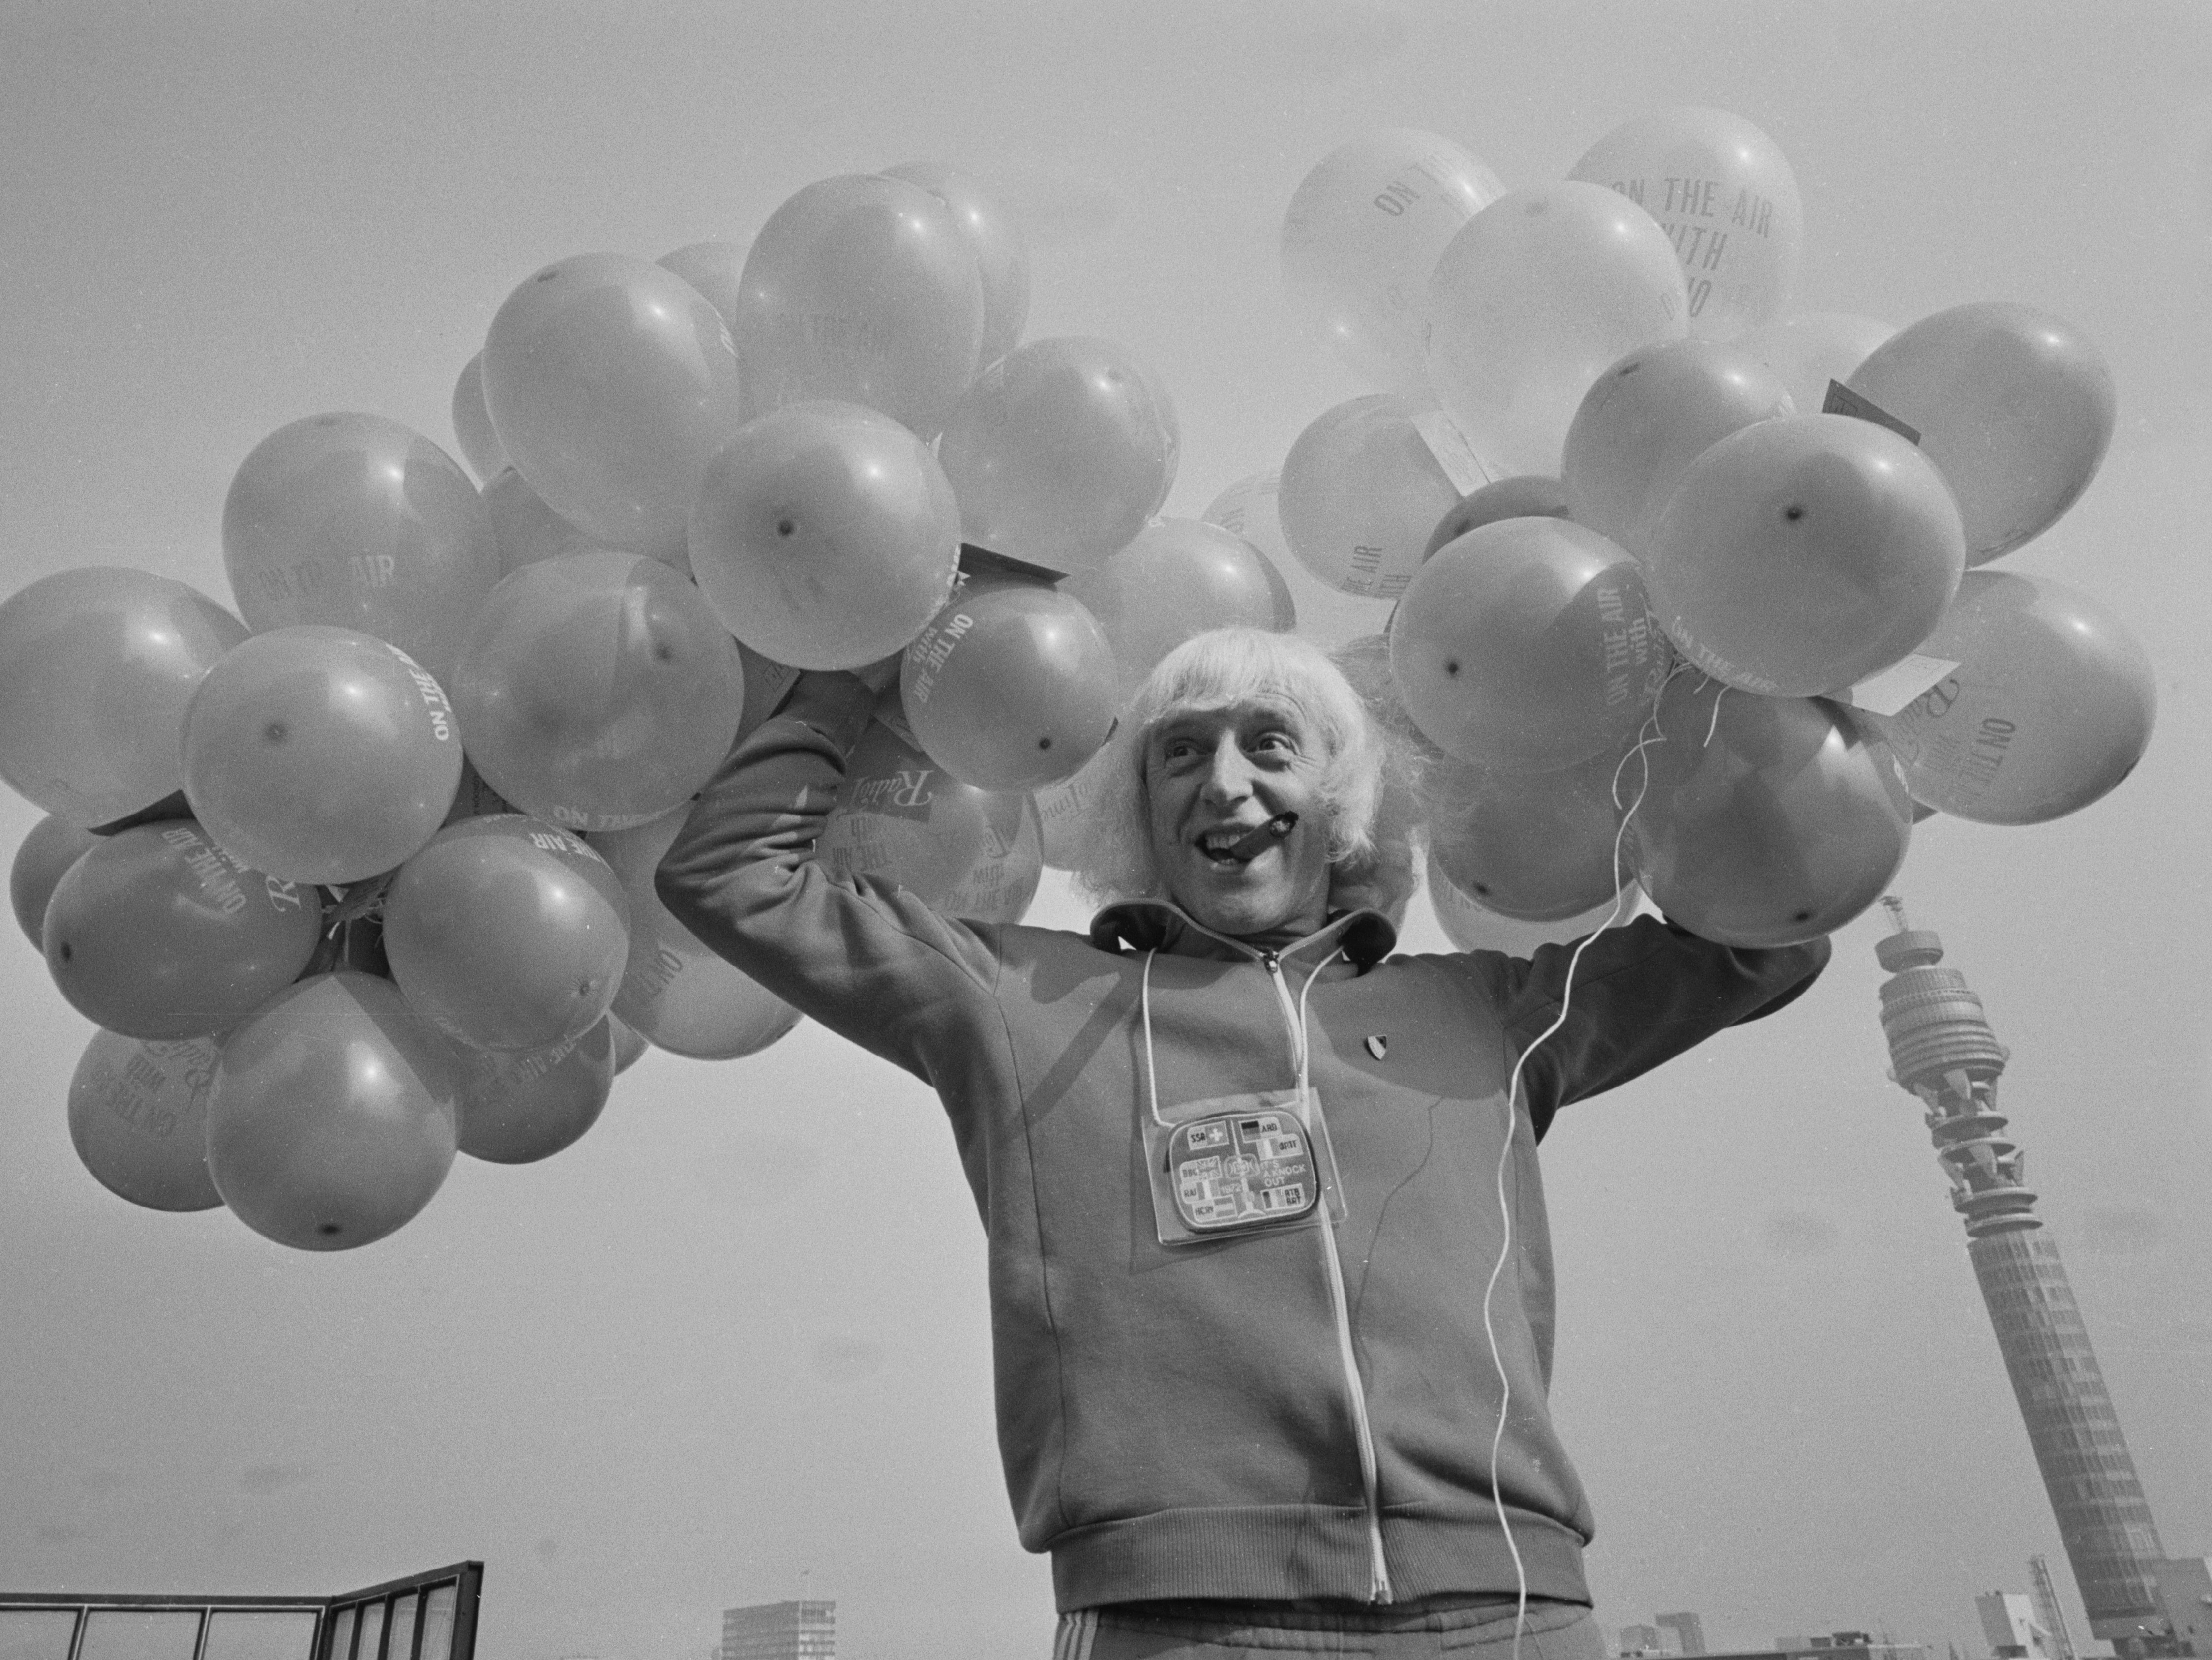 Jimmy Savile on the roof of Broadcasting House in London to celebrate the fifth anniversary of BBC radio, 30 September 1972